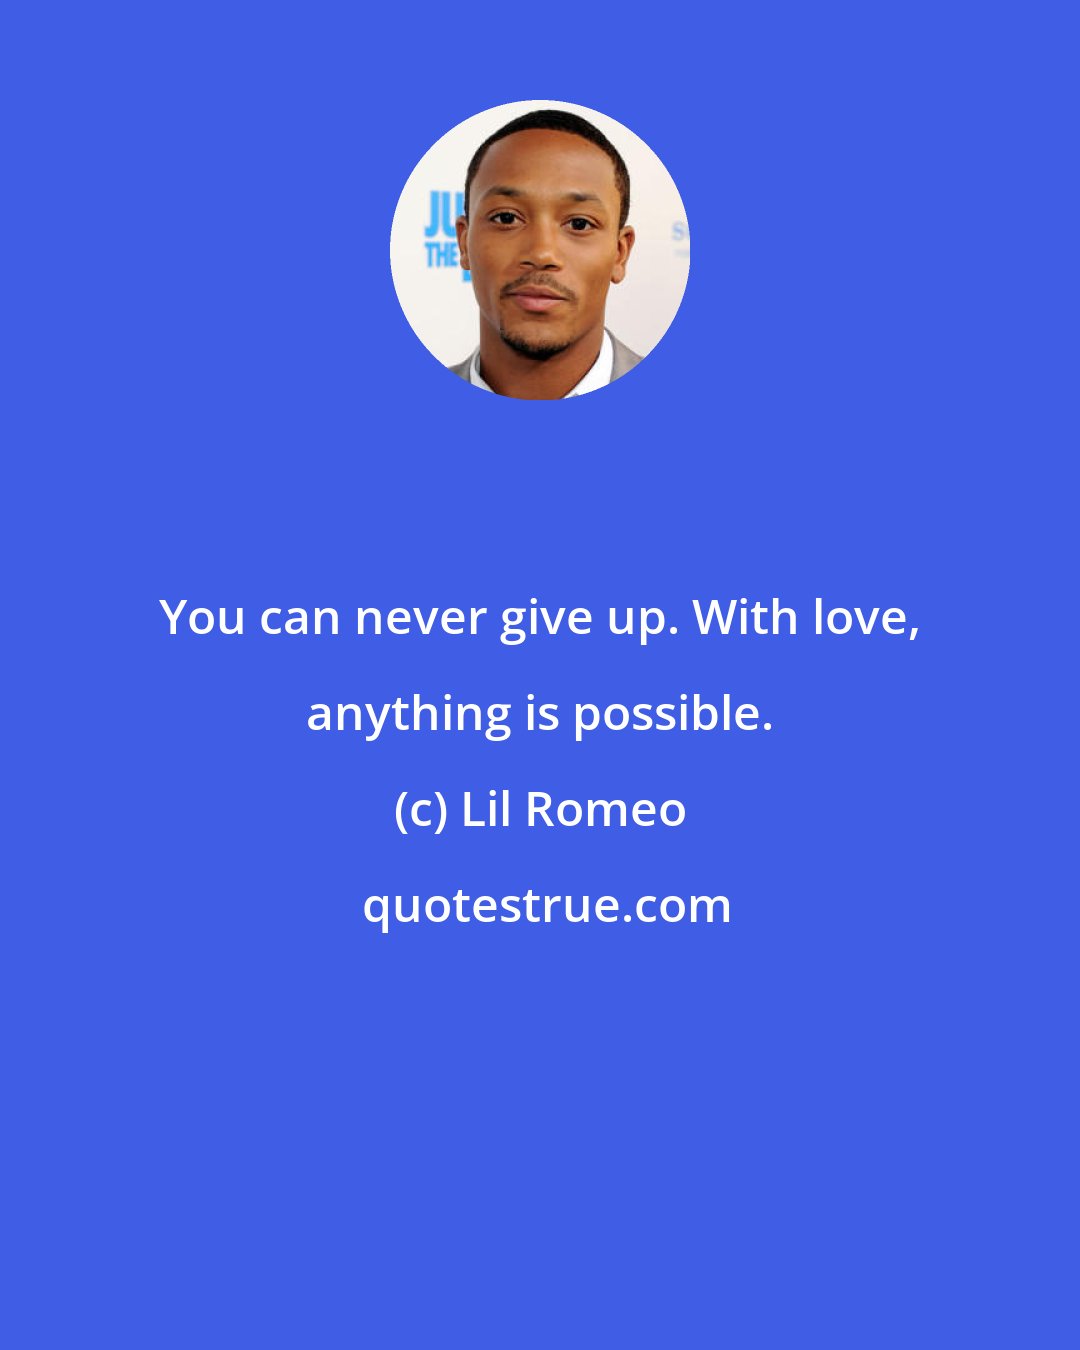 Lil Romeo: You can never give up. With love, anything is possible.